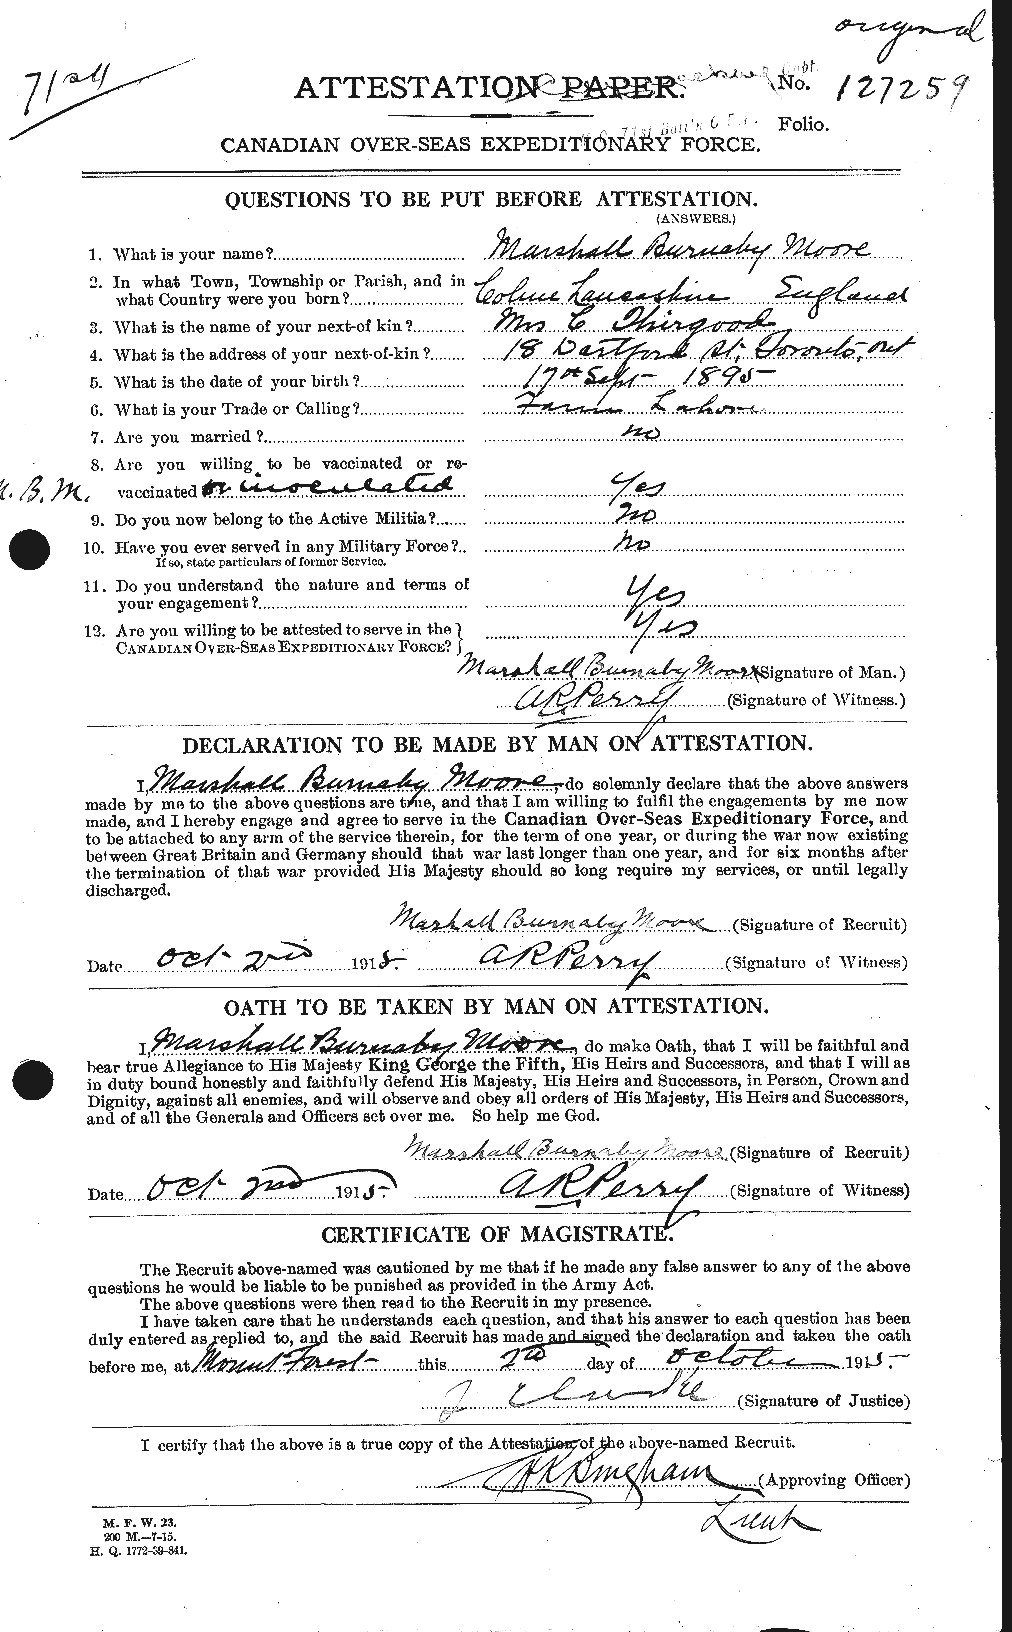 Personnel Records of the First World War - CEF 503428a